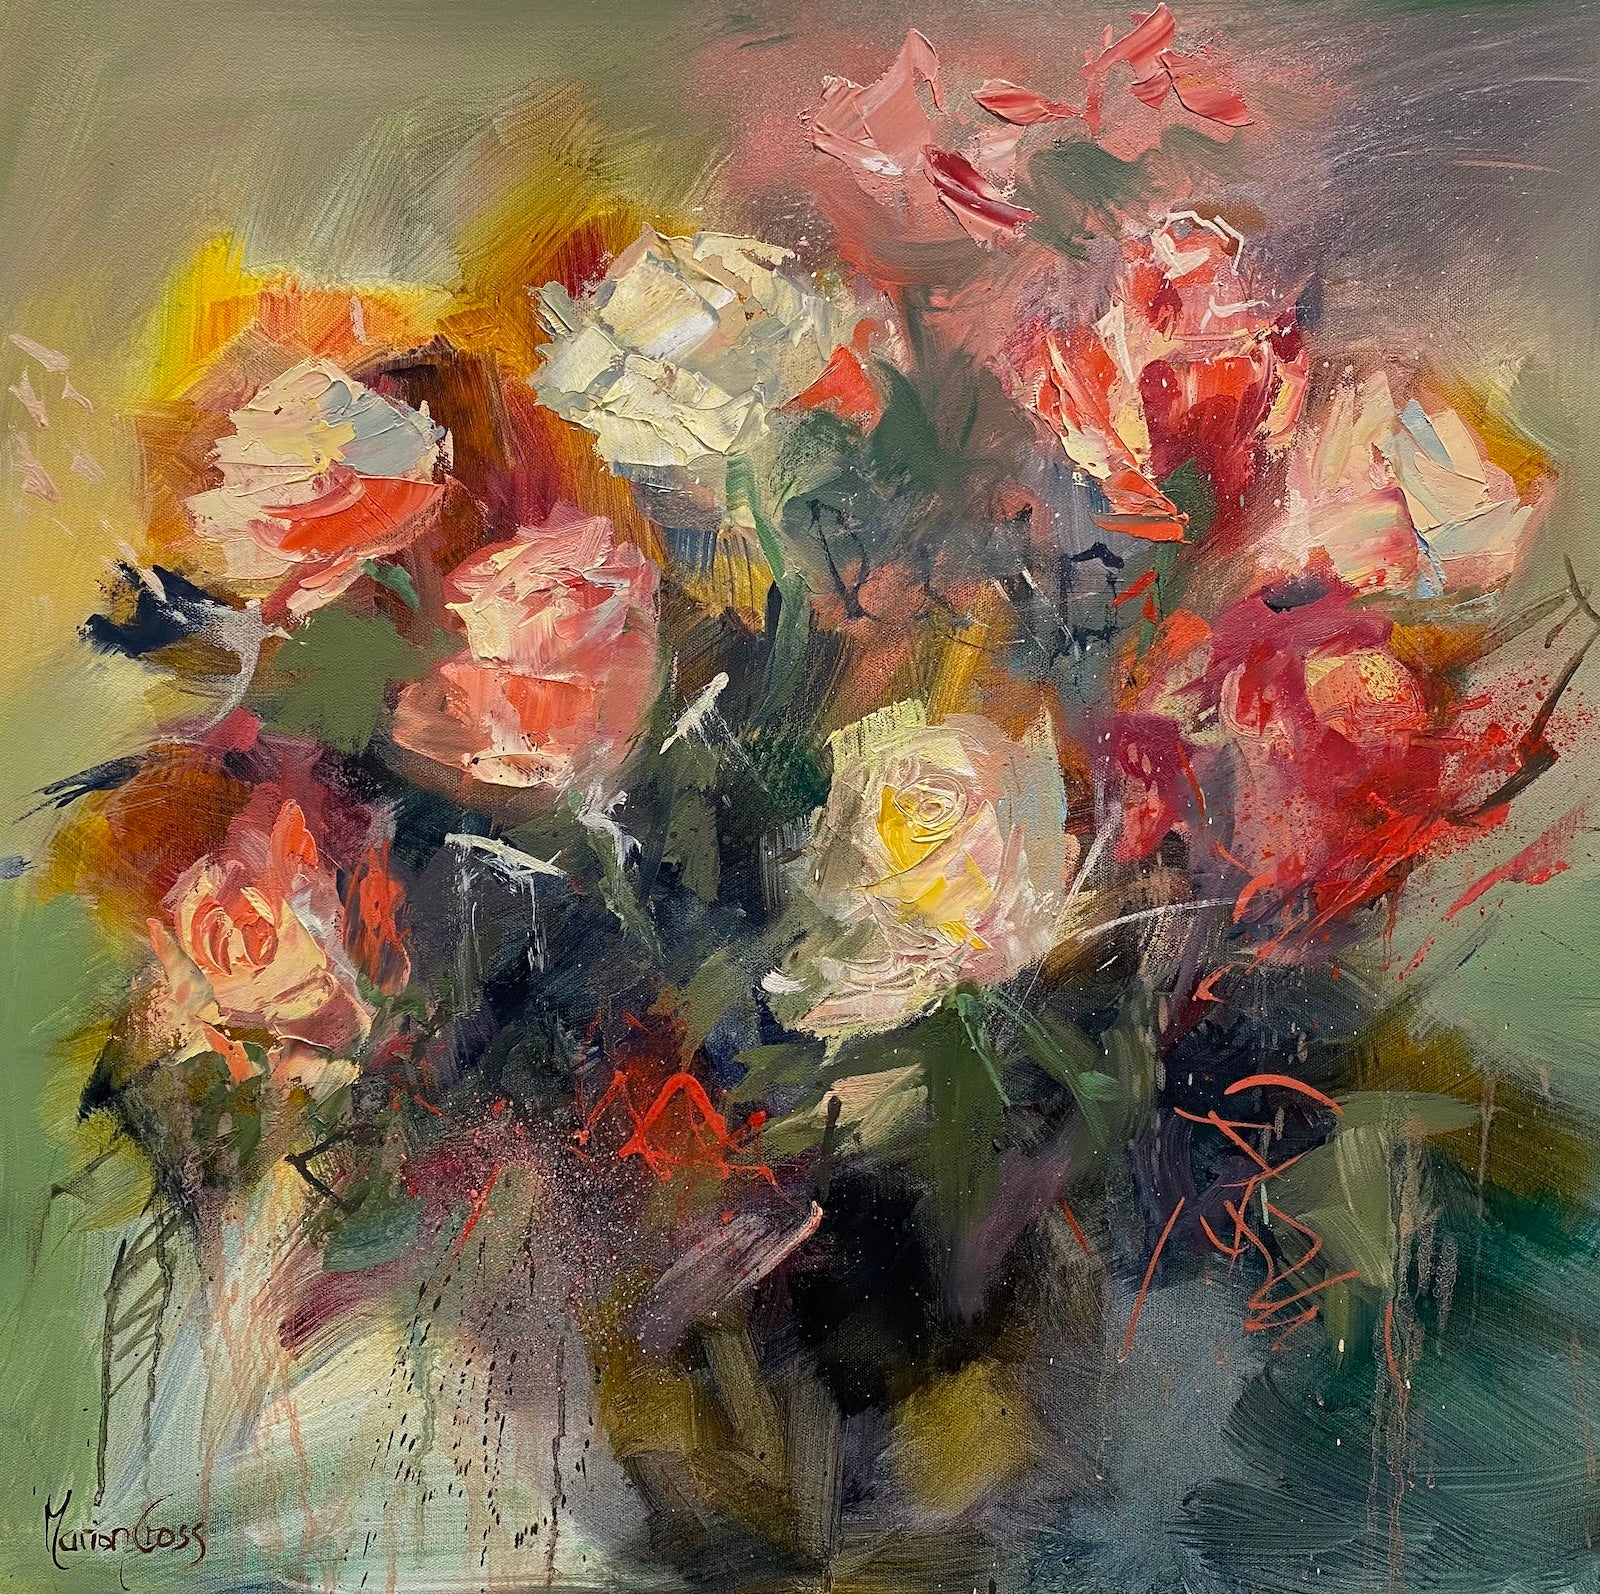 Bed of Roses1 - ORIGINAL PAINTING